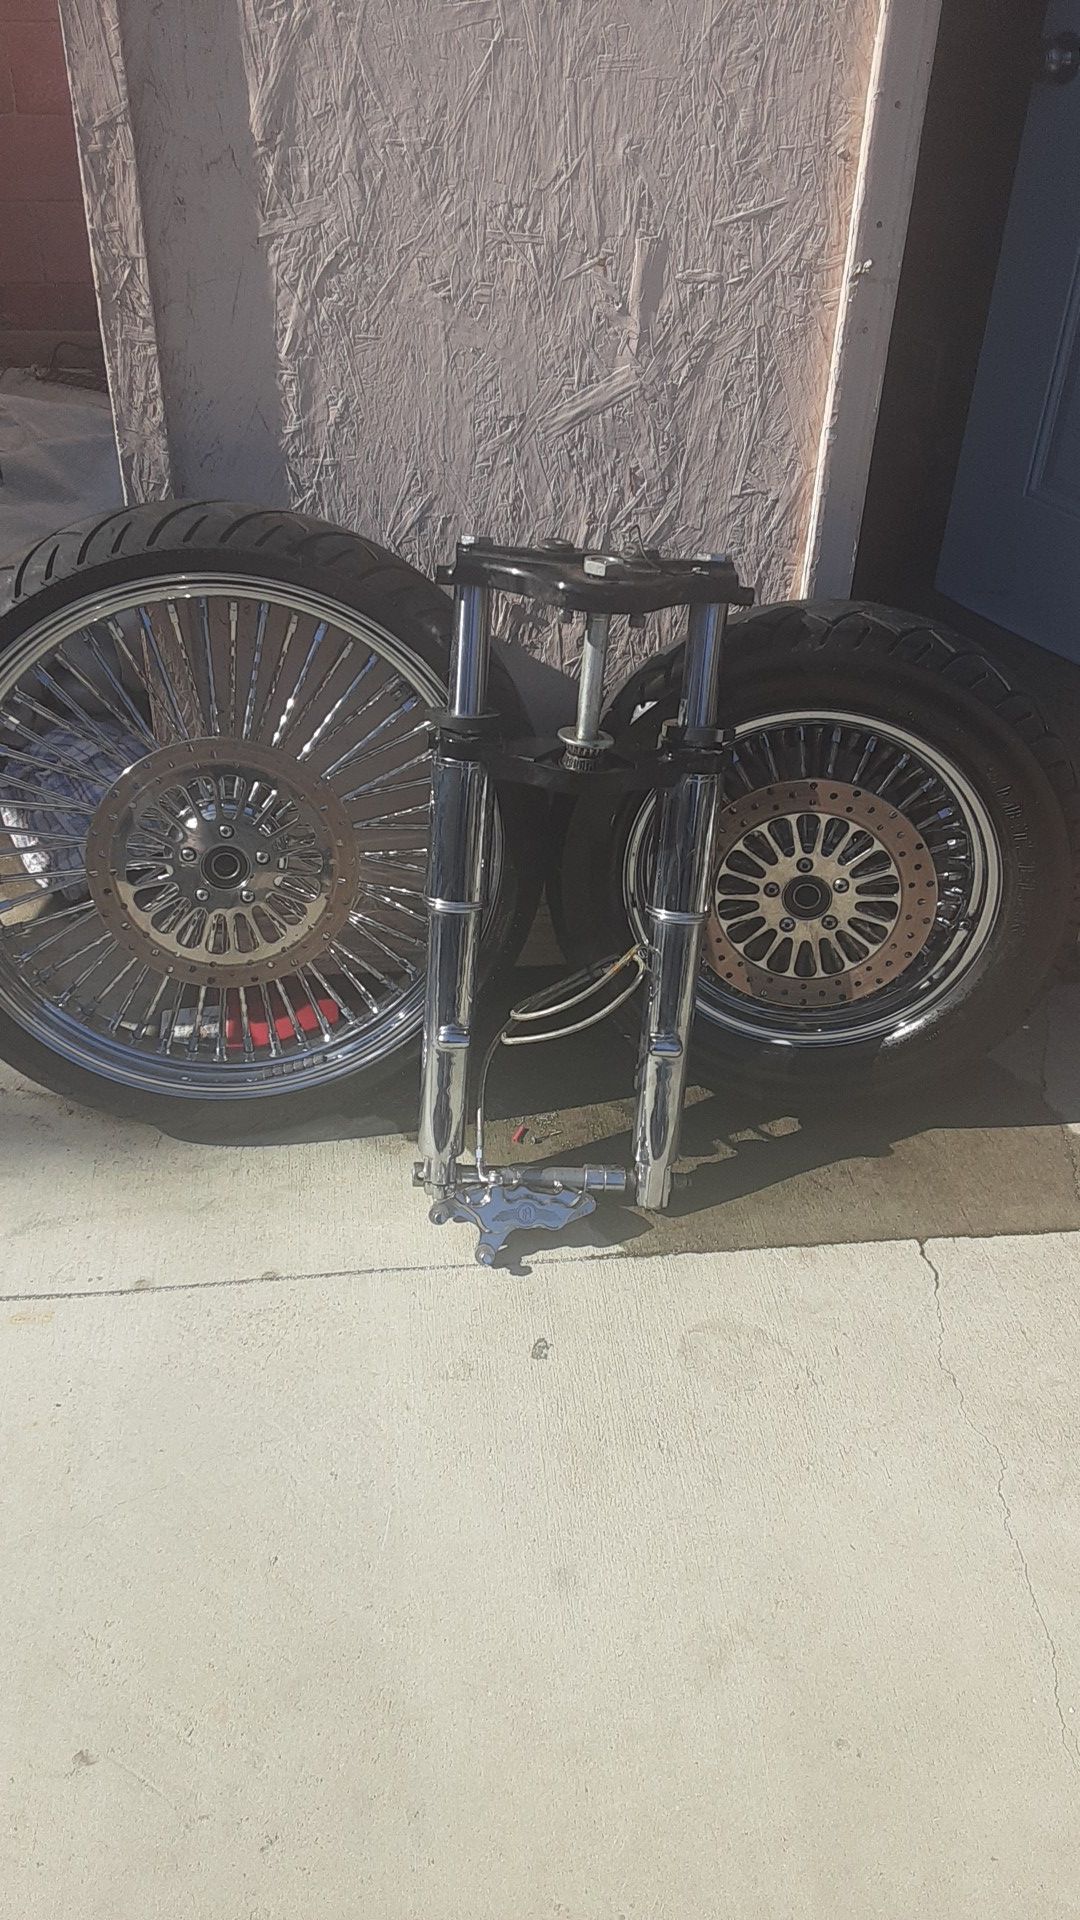 23' rim's front and back 18 ' brake calipers chrome whole package $1200. Or best offer